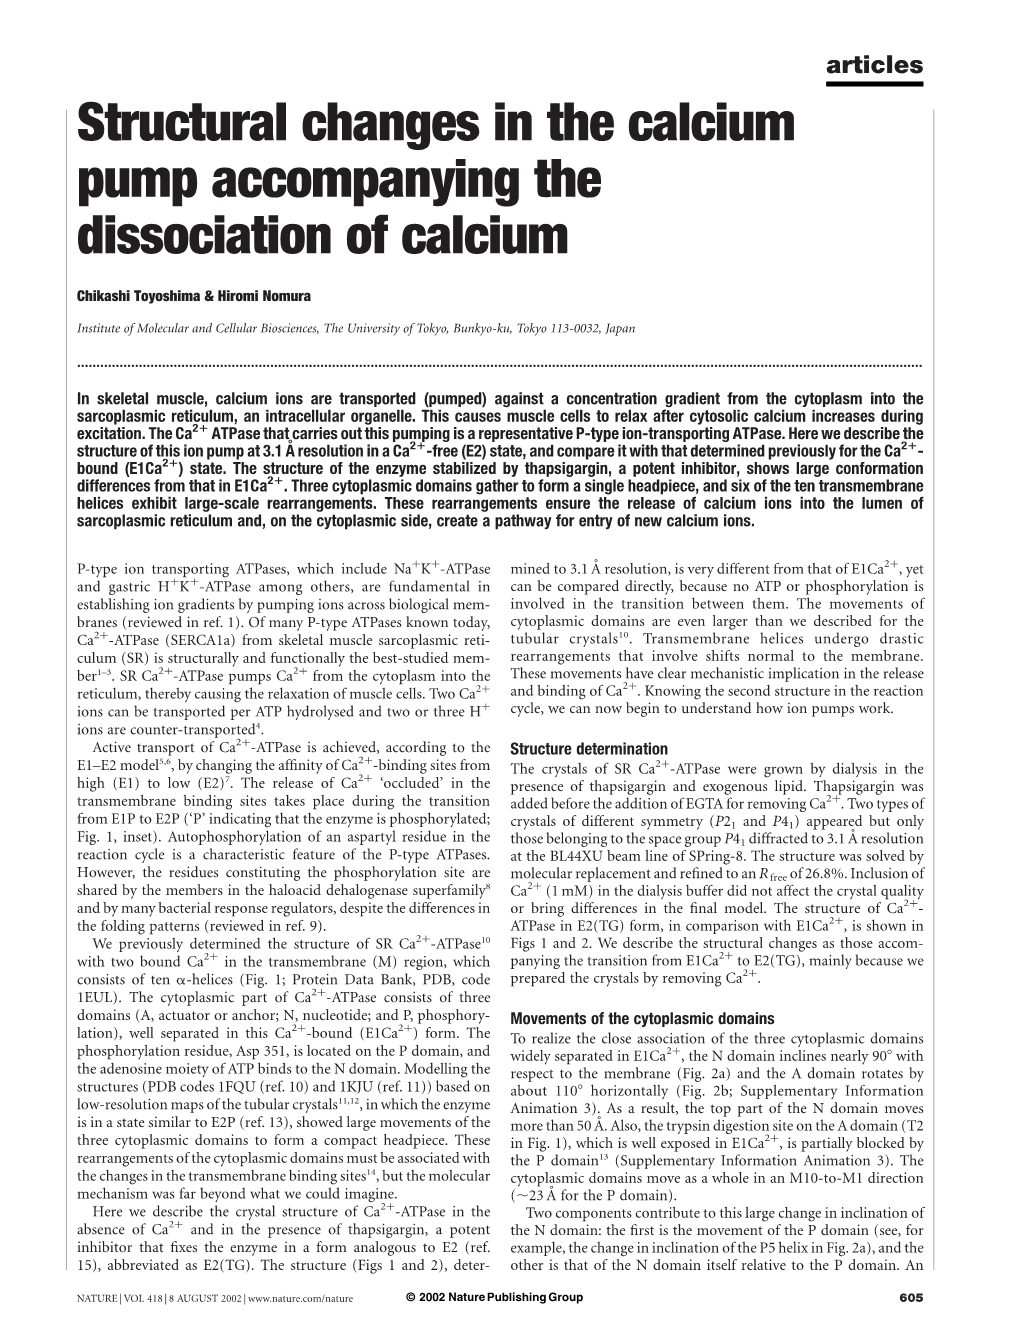 Structural Changes in the Calcium Pump Accompanying the Dissociation of Calcium